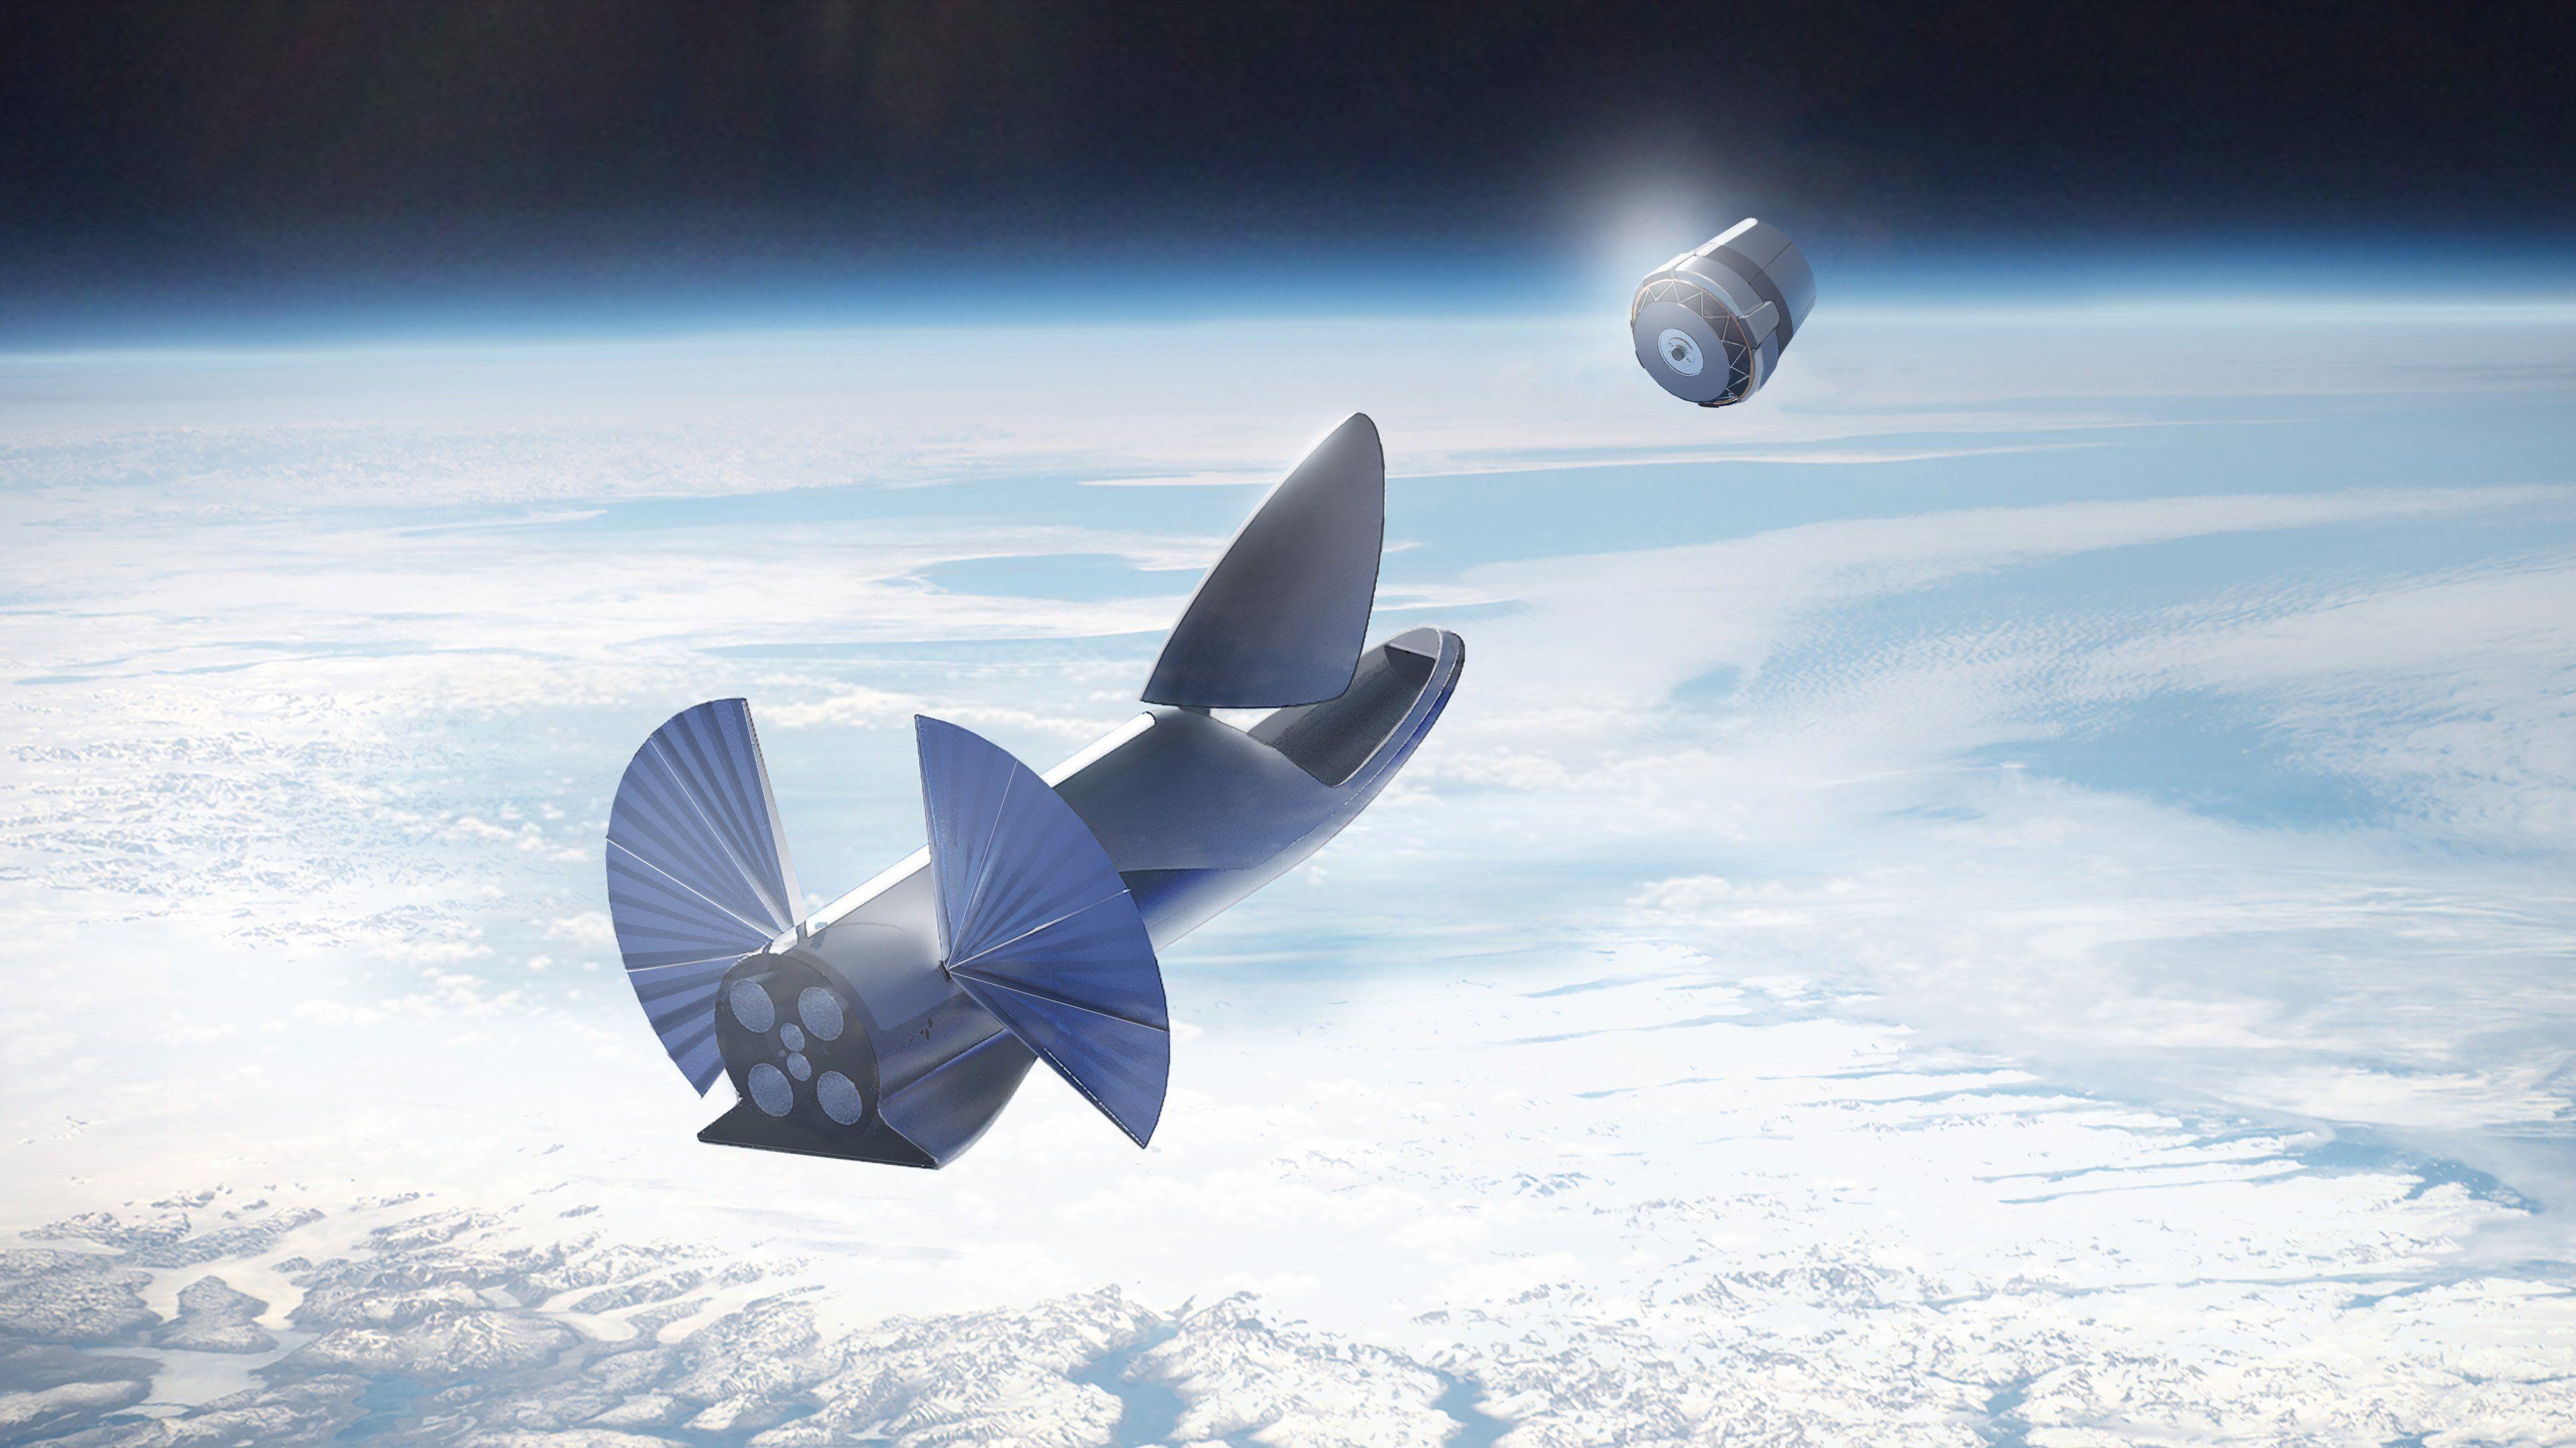 SpaceX Fairing Logo - NASA funds study on SpaceX BFR as option for massive space telescope ...